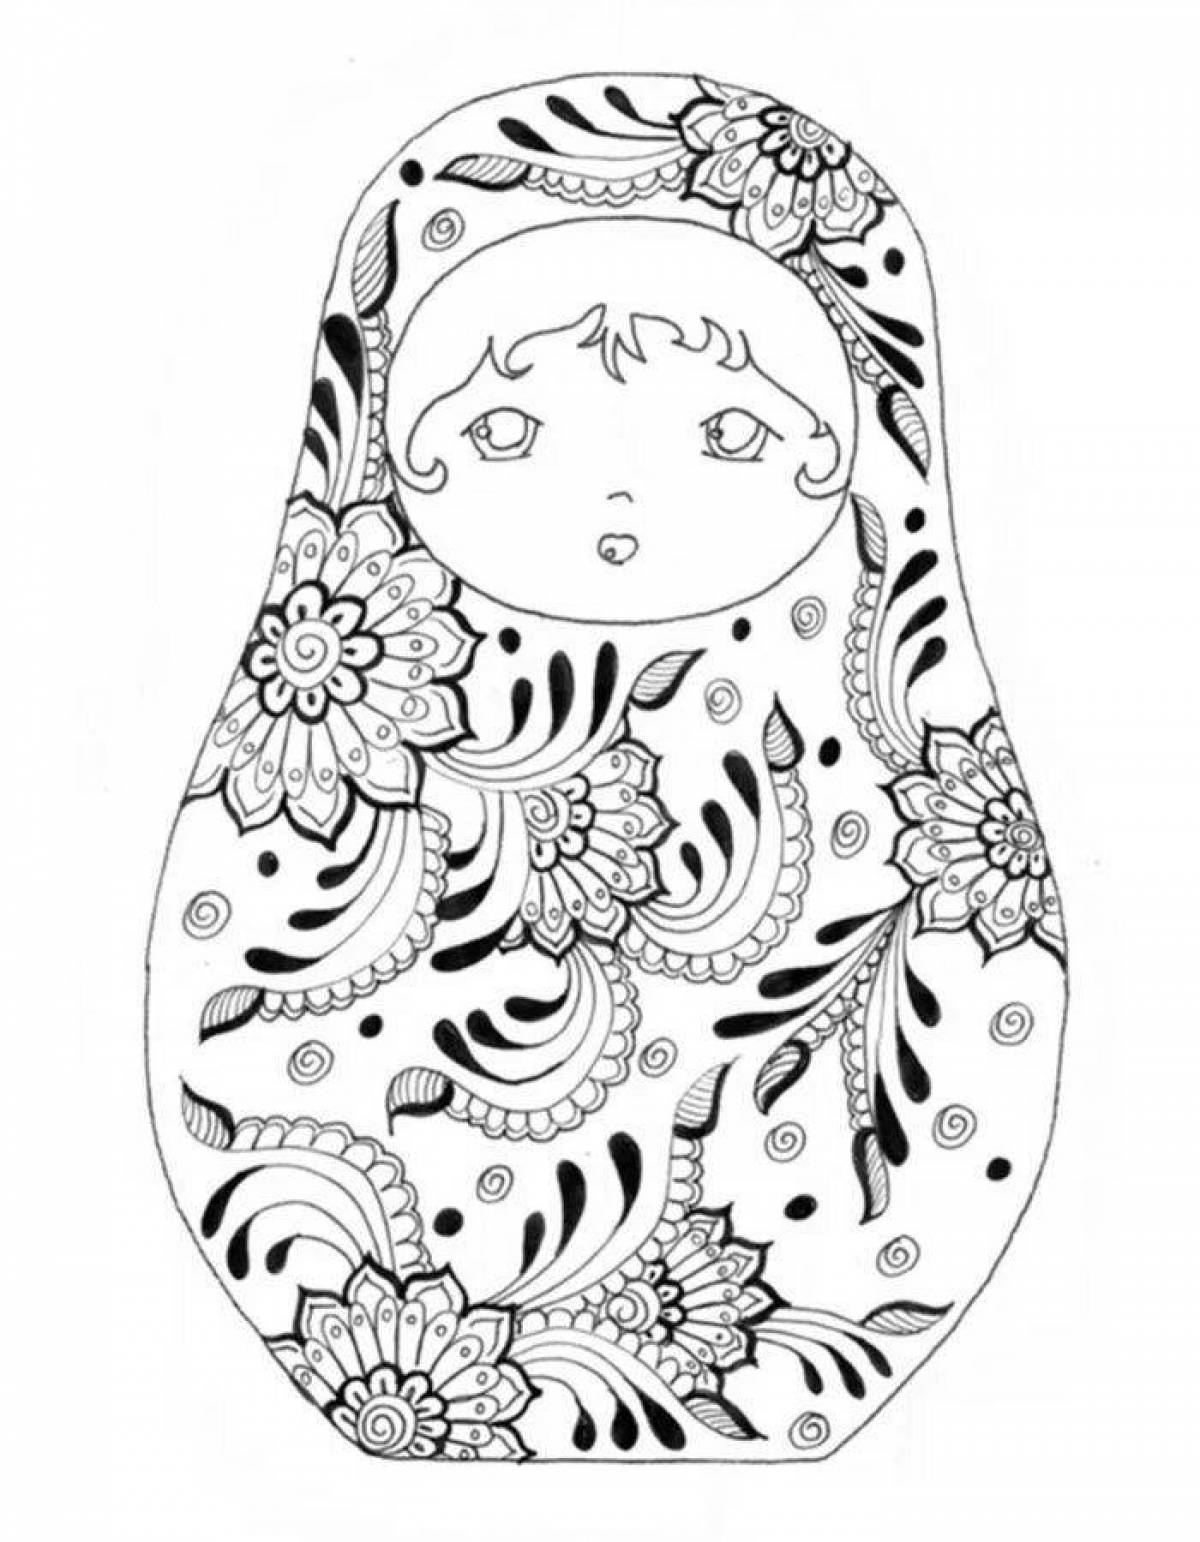 Coloring page shining russian doll